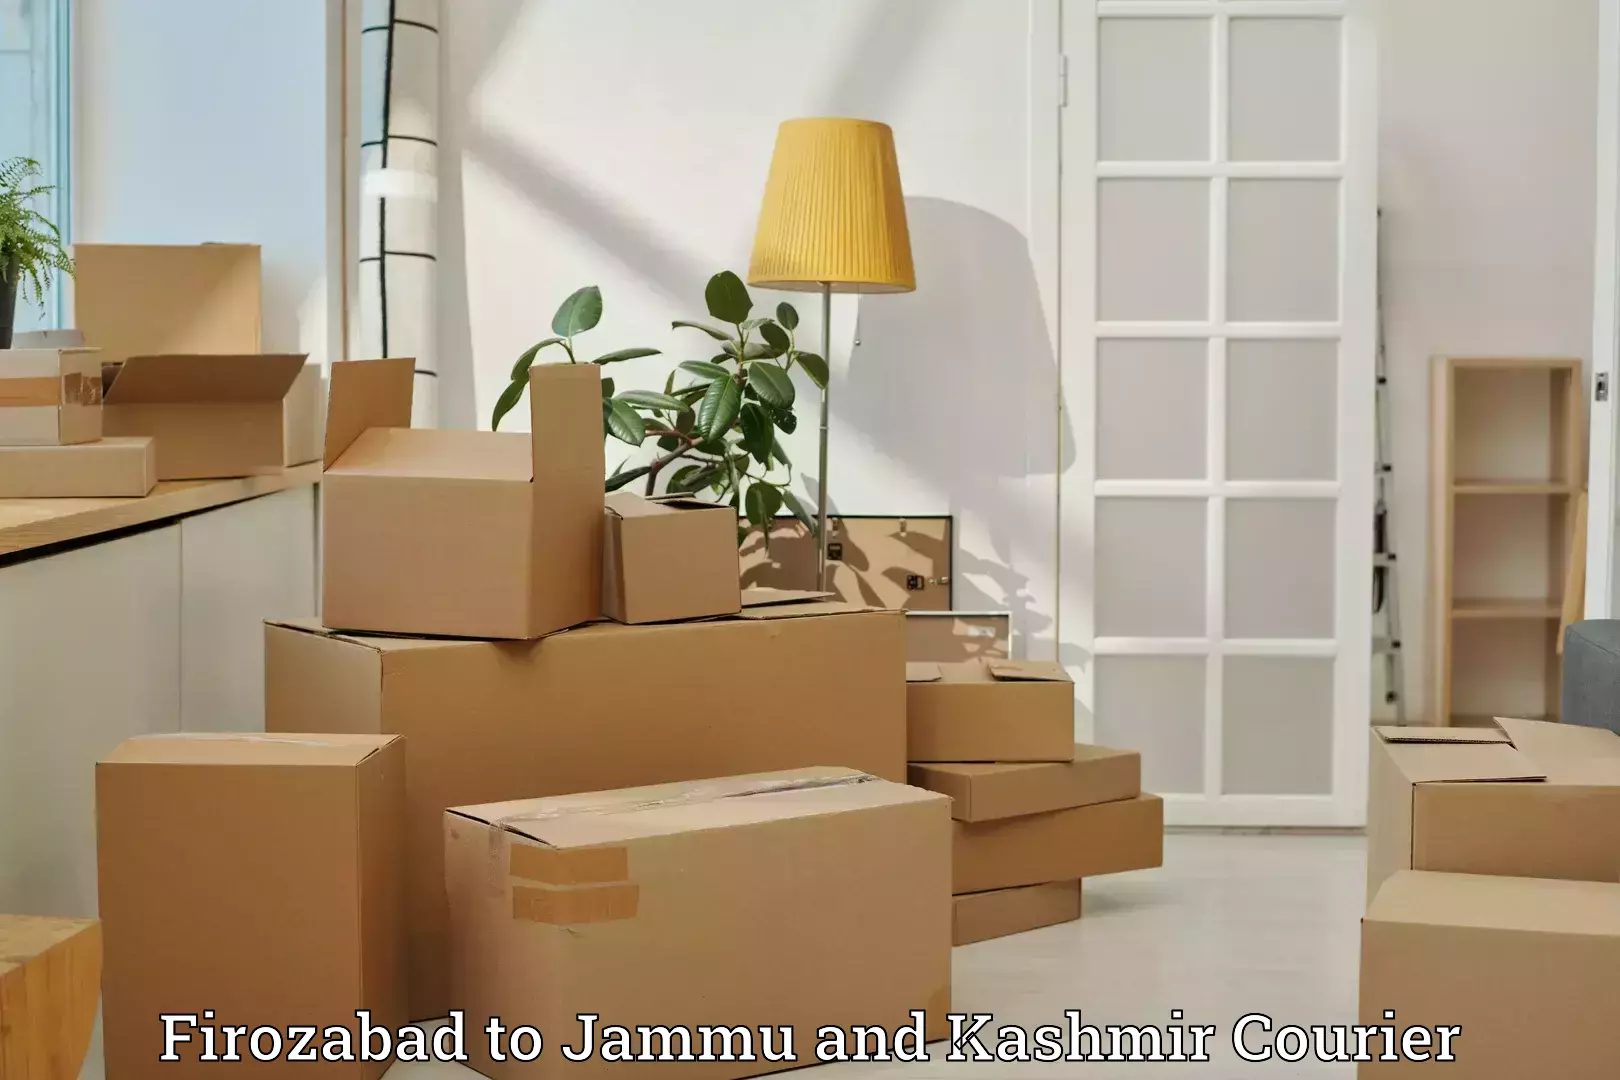 Luggage delivery network Firozabad to Jammu and Kashmir